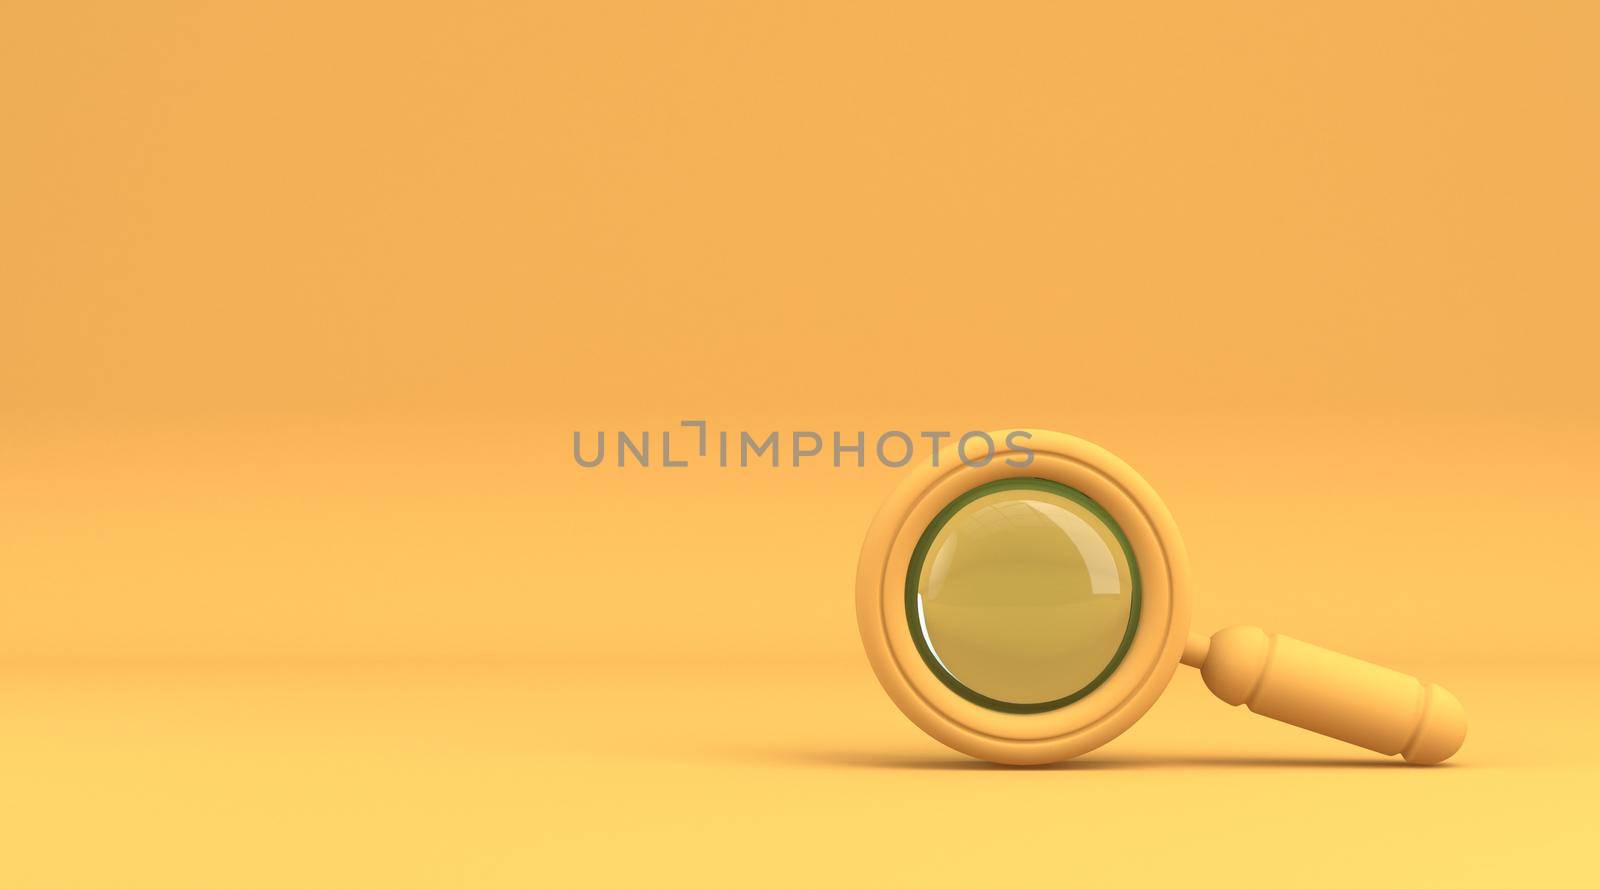 Search concept sign 3D rendering illustration isolated on yellow background